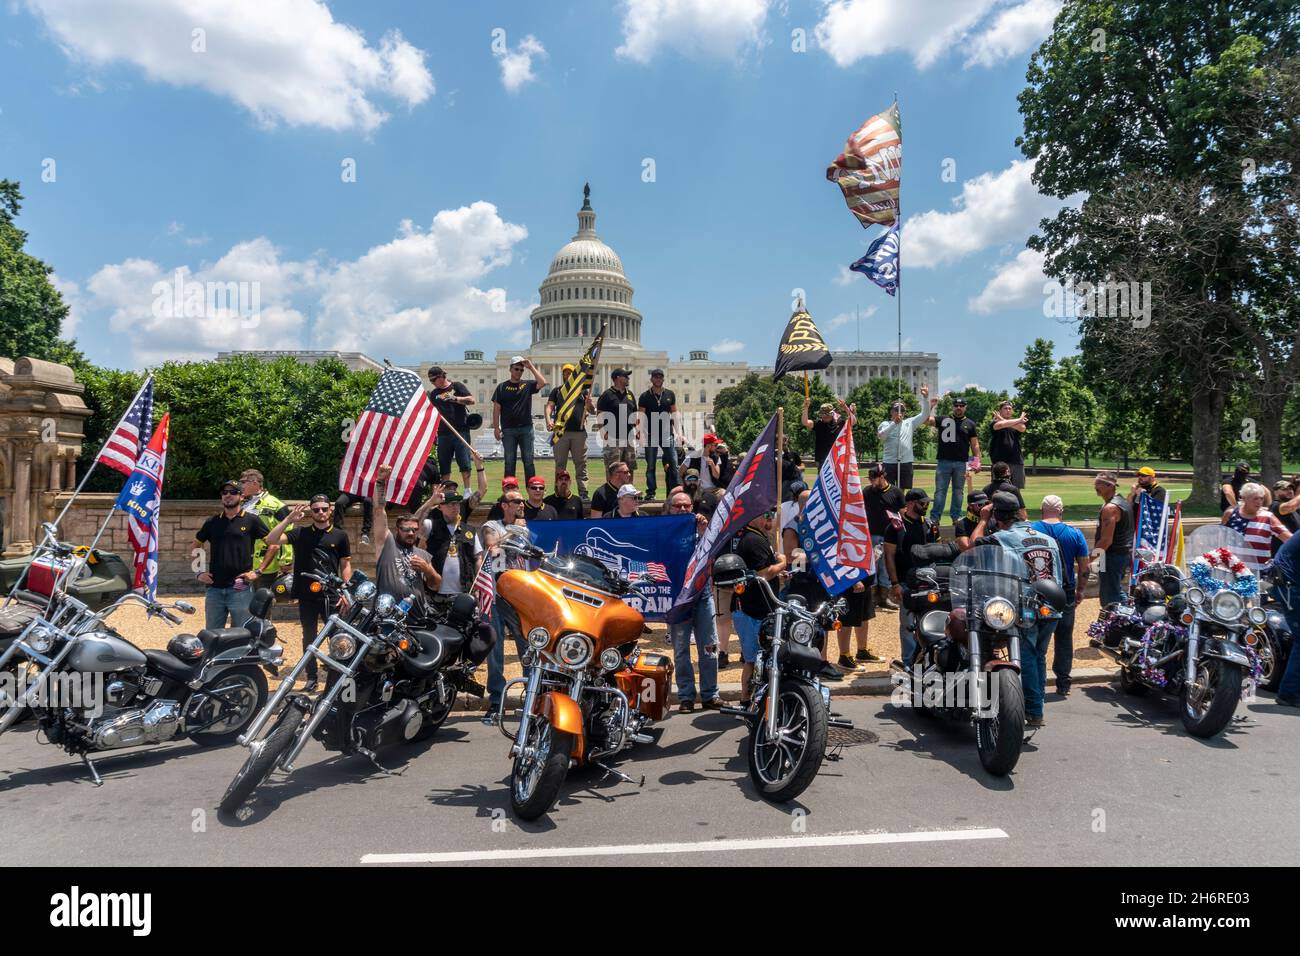 Members of the Proud Boys and a motorcycle group pose for a photo in front of the US Capitol building in Washington DC on 4th July, 2020. Credit: Rise Images/Alamy Stock Photo